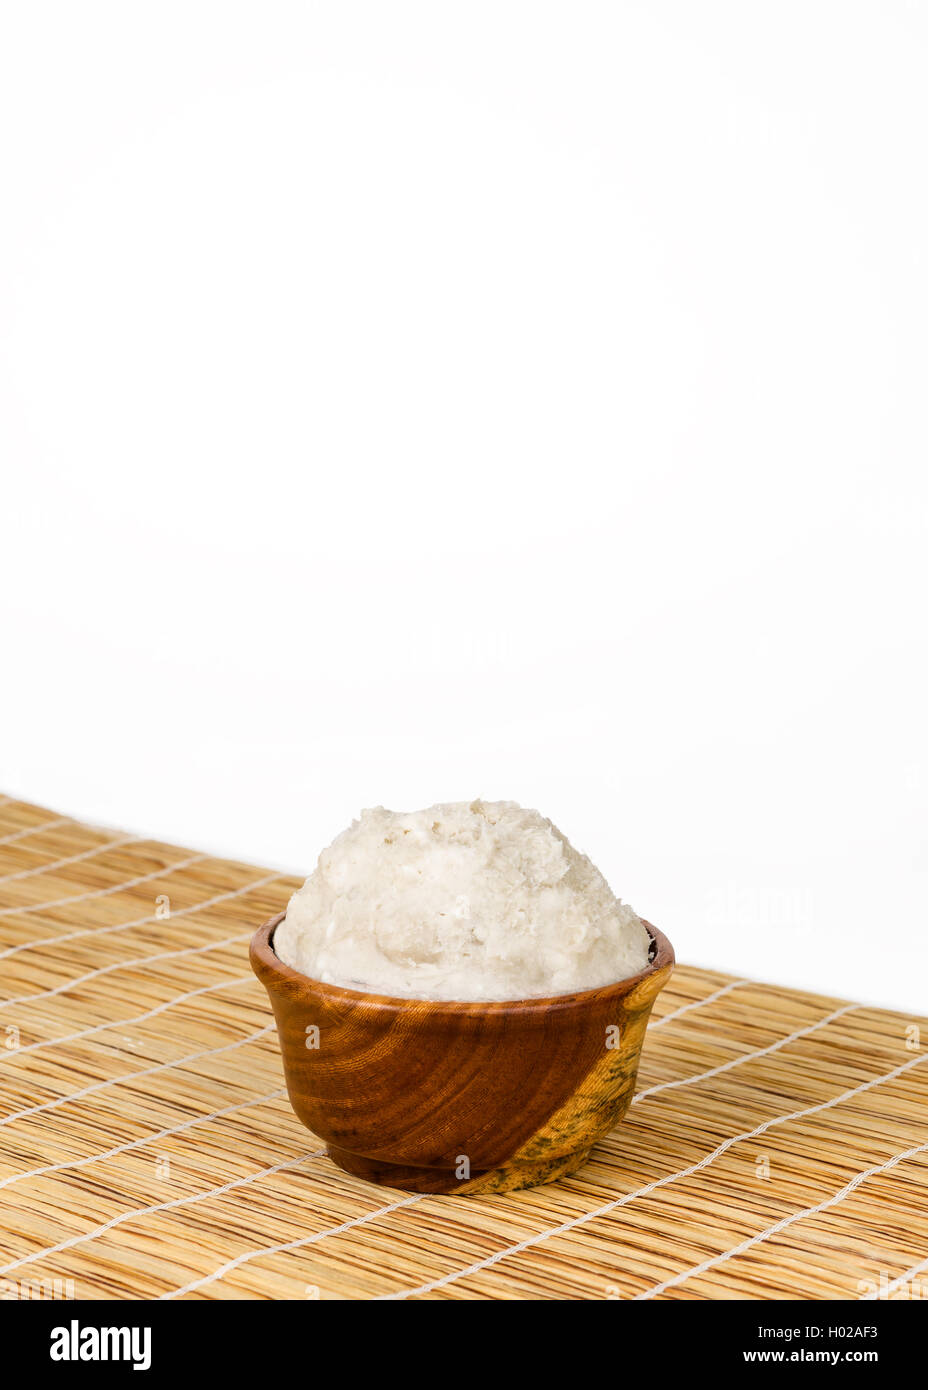 Unrefined, organic Shea butter in the wooden bowl  standing on the straw mat, clean white background. Stock Photo